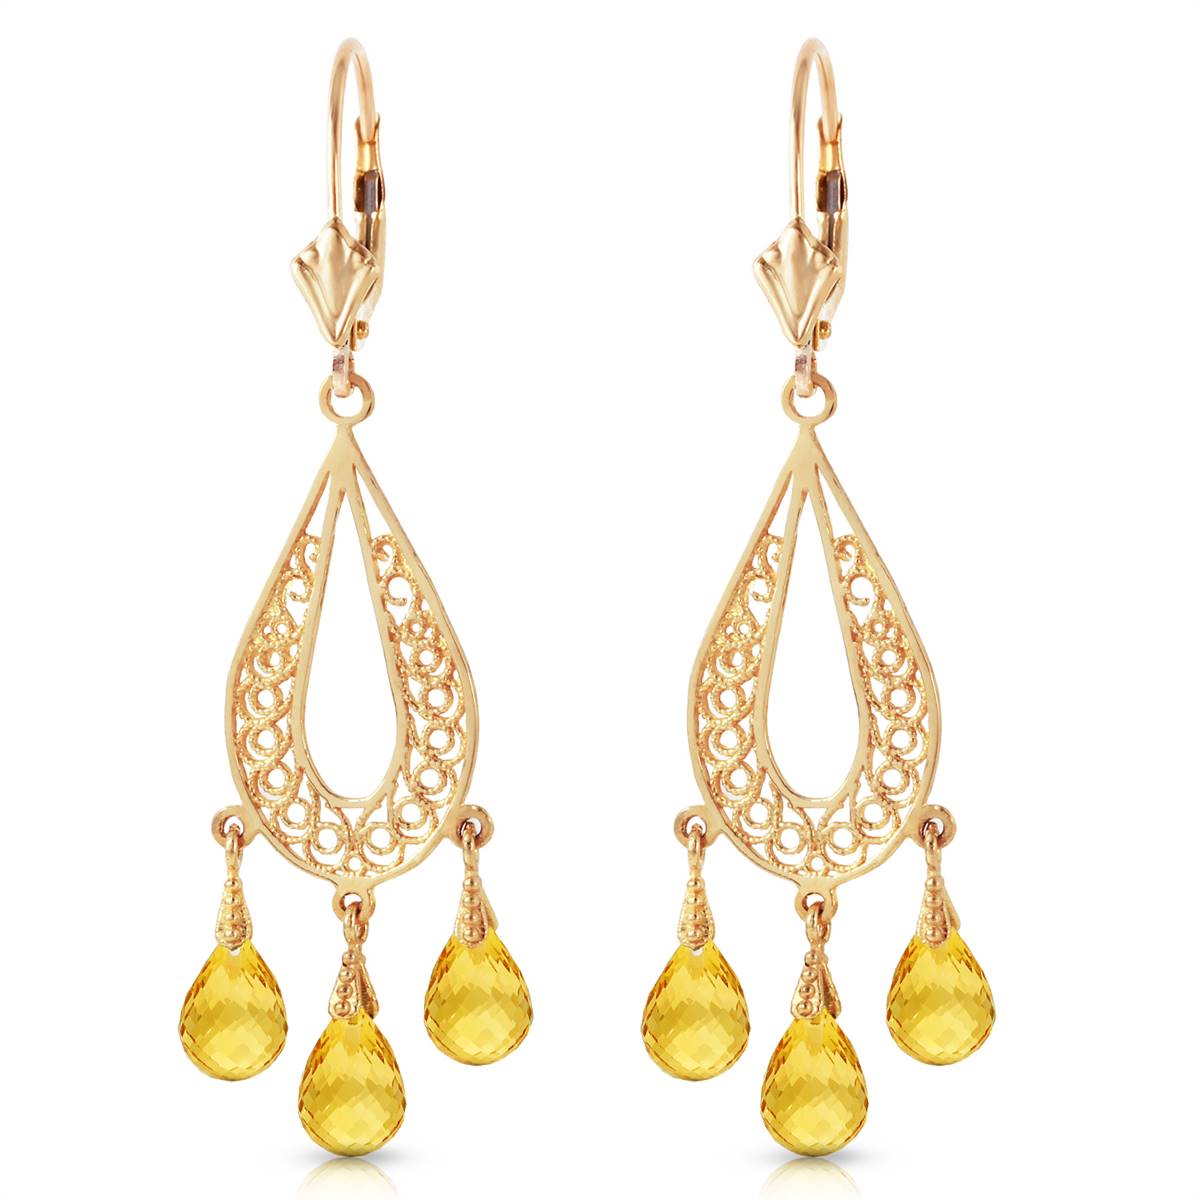 3.75 Carat 14K Solid Yellow Gold Chandelier Earrings Natural Citrine Jewelry